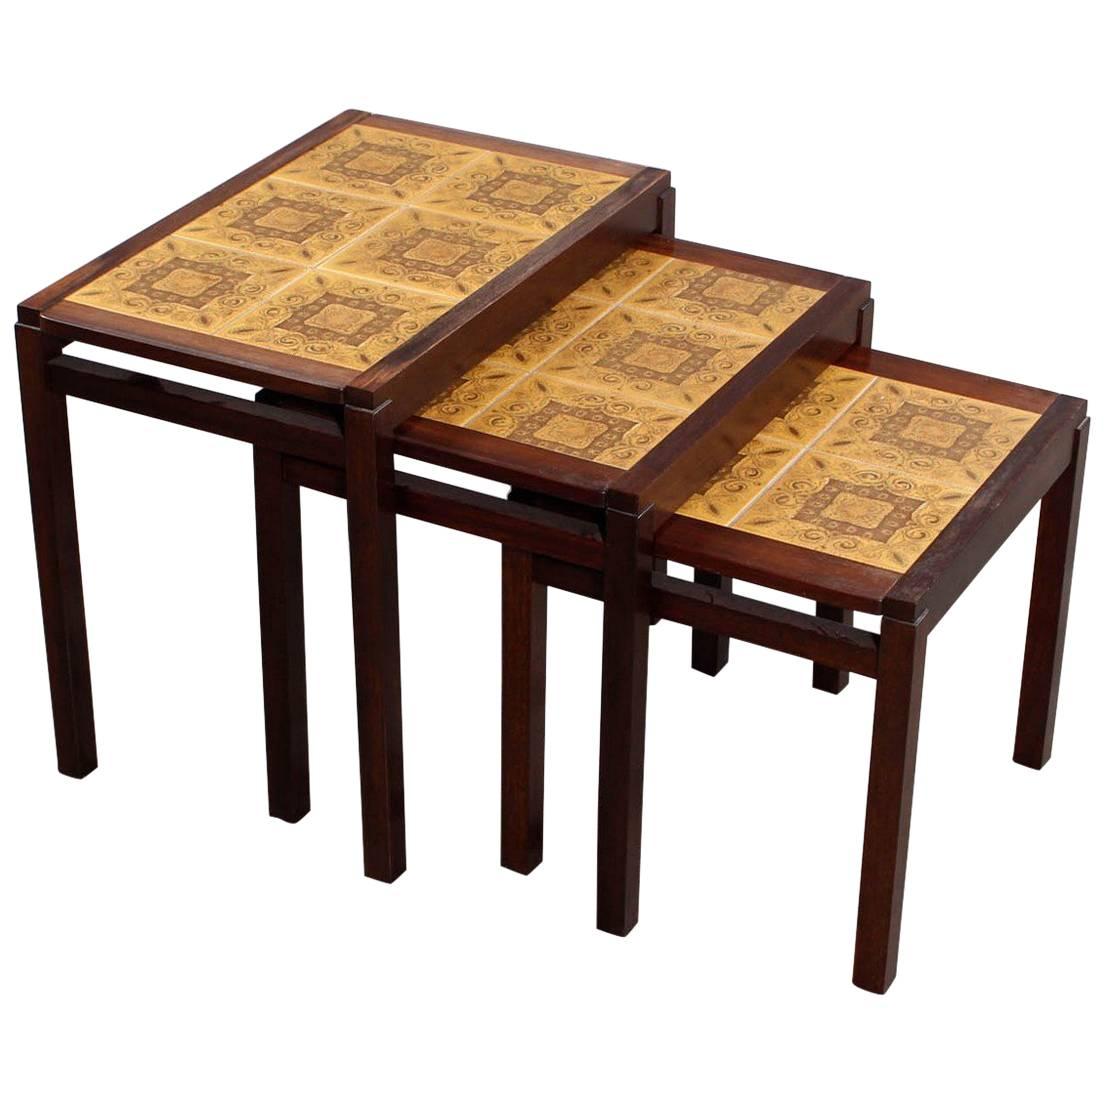 Set of Three Rosewood and Ceramic Tile Danish Modern Nesting Tables